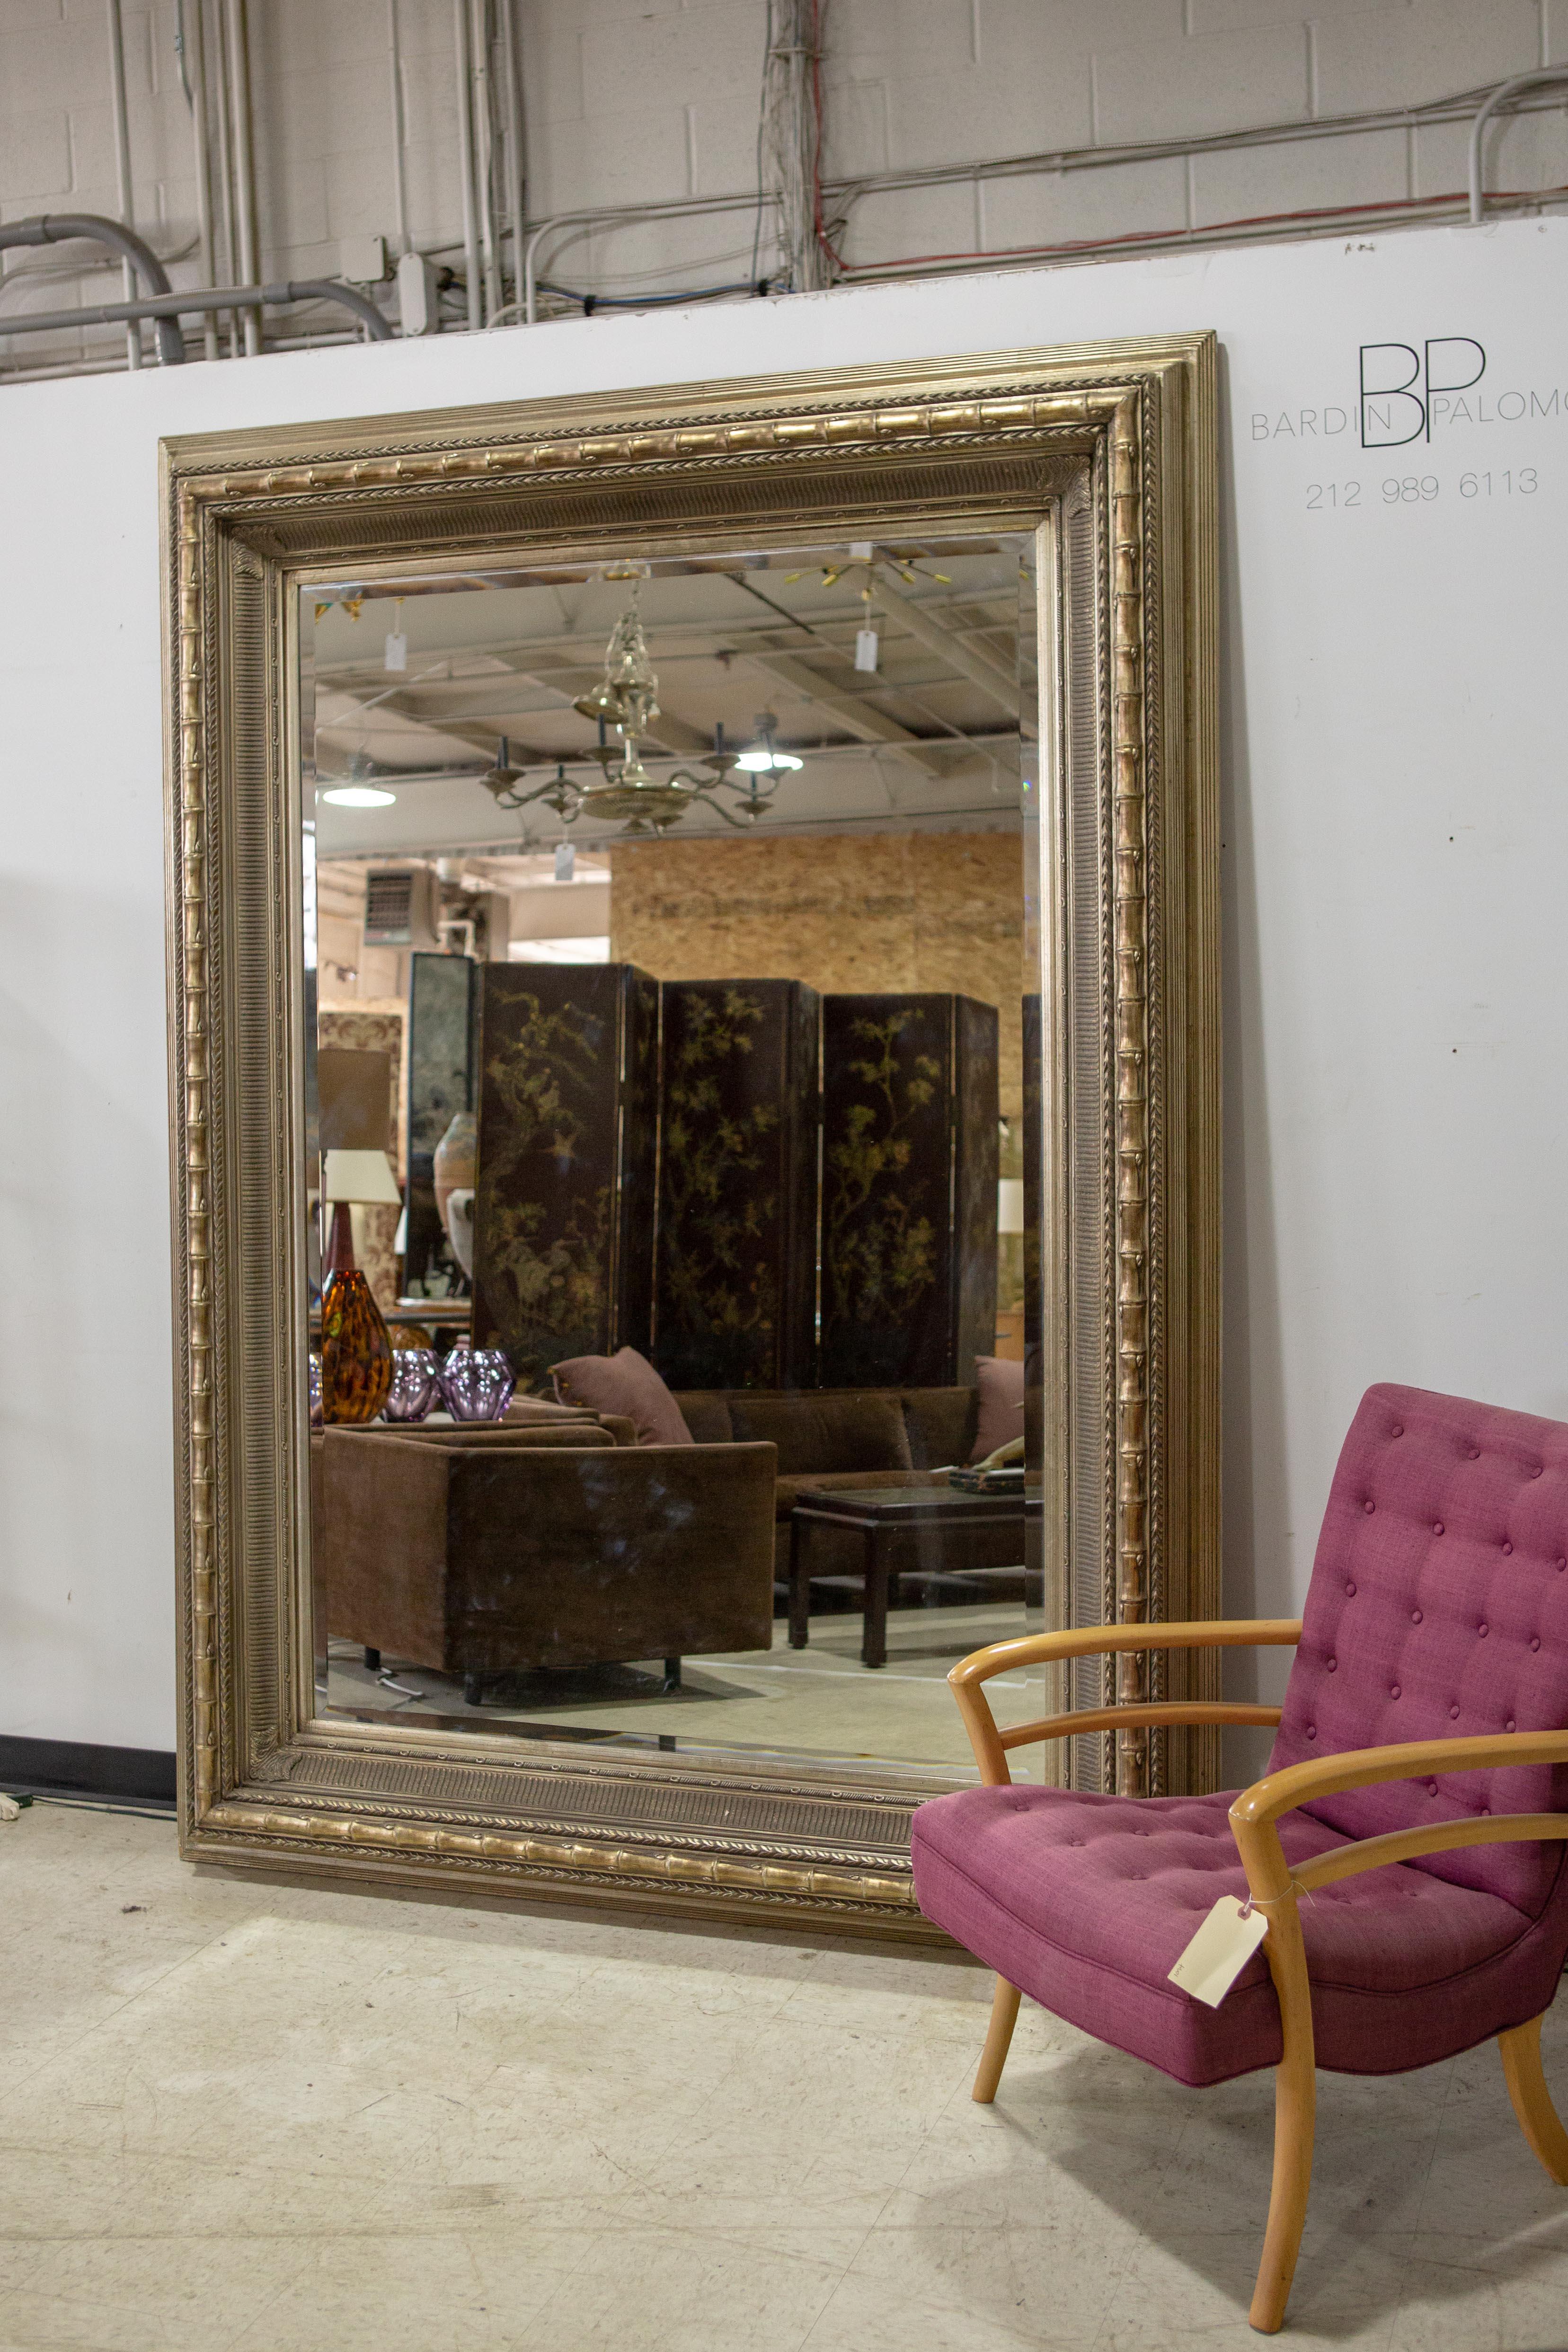 Monumental Neoclassical style metal mirror - Very large (over 7.5' H) , custom made, burnished metal leaf, Neoclassical style mirror with linear and bamboo details throughout. Mirror and frame are in amazing condition. Photo with chair for scale.